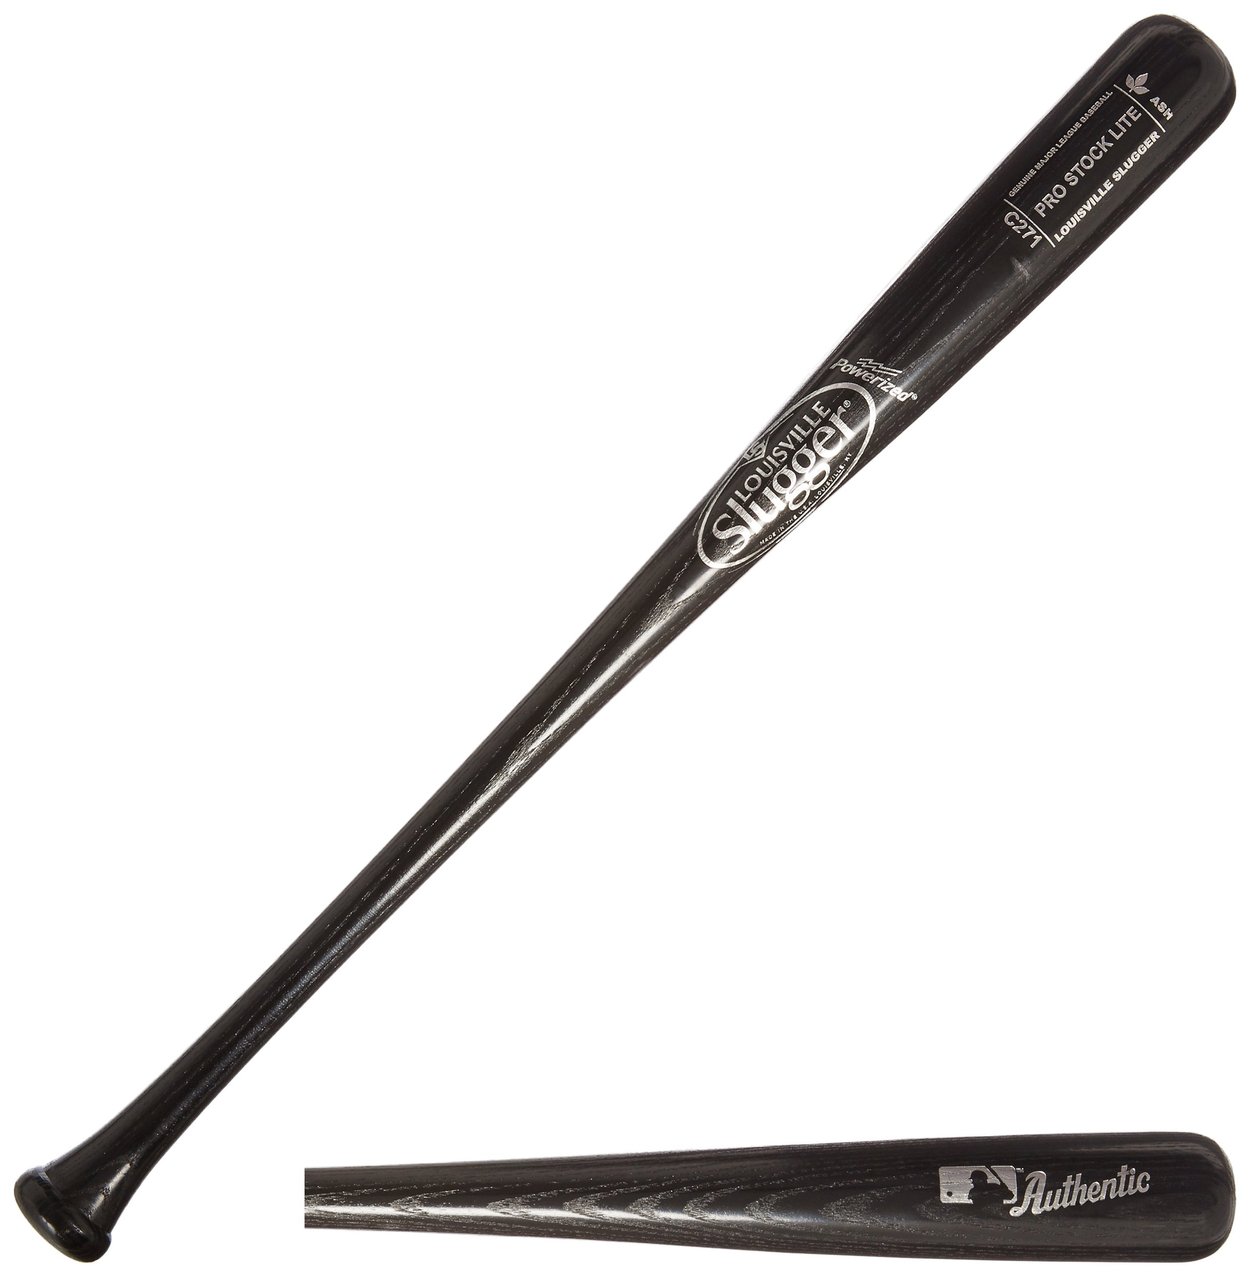 The Louisville Slugger Pro Stock Lite Wood Bat Series is made from flexible, dependable premium ash wood, and is guaranteed to have a -3 drop or lighter (This model is guaranteed -5). Despite a lightweight feel, the Pro Stock Lite maintains all the durability of heavier models with the flexibility you expect from an ash bat.